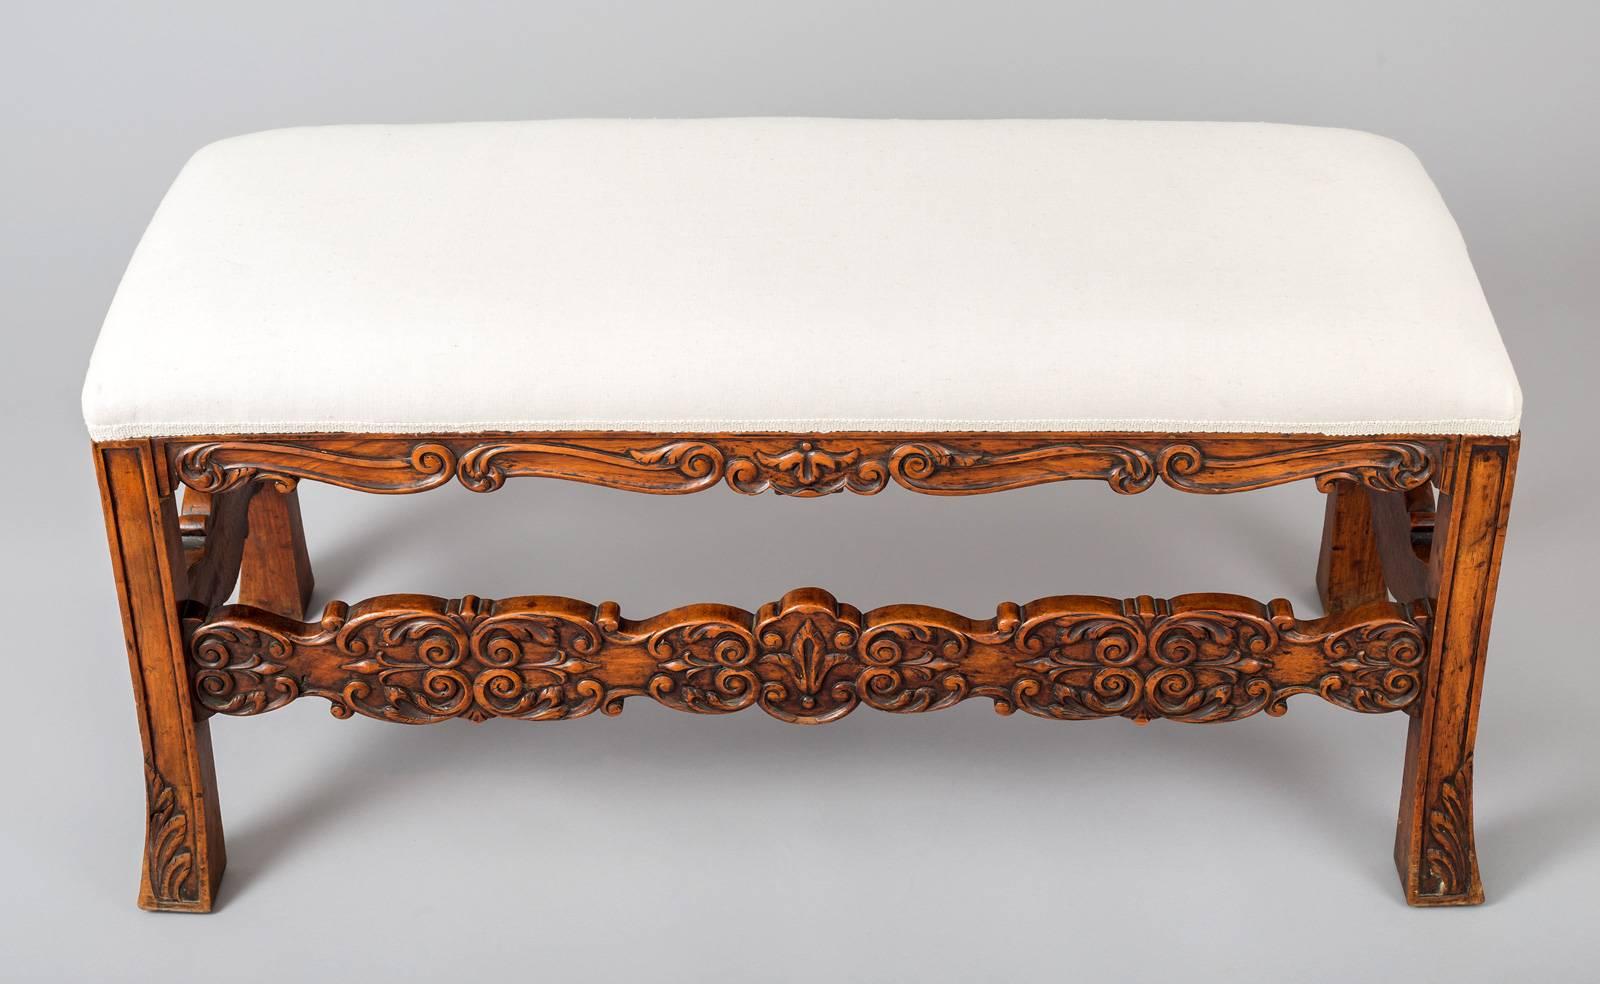 French walnut bench with shaped aprons and stretchers on all sides.  The aprons and stretchers are boldly carved with C-scrolls and double C-scrolls.  The squared legs are splayed with carving at the bottom of the feet.  Upholstered in an off-white